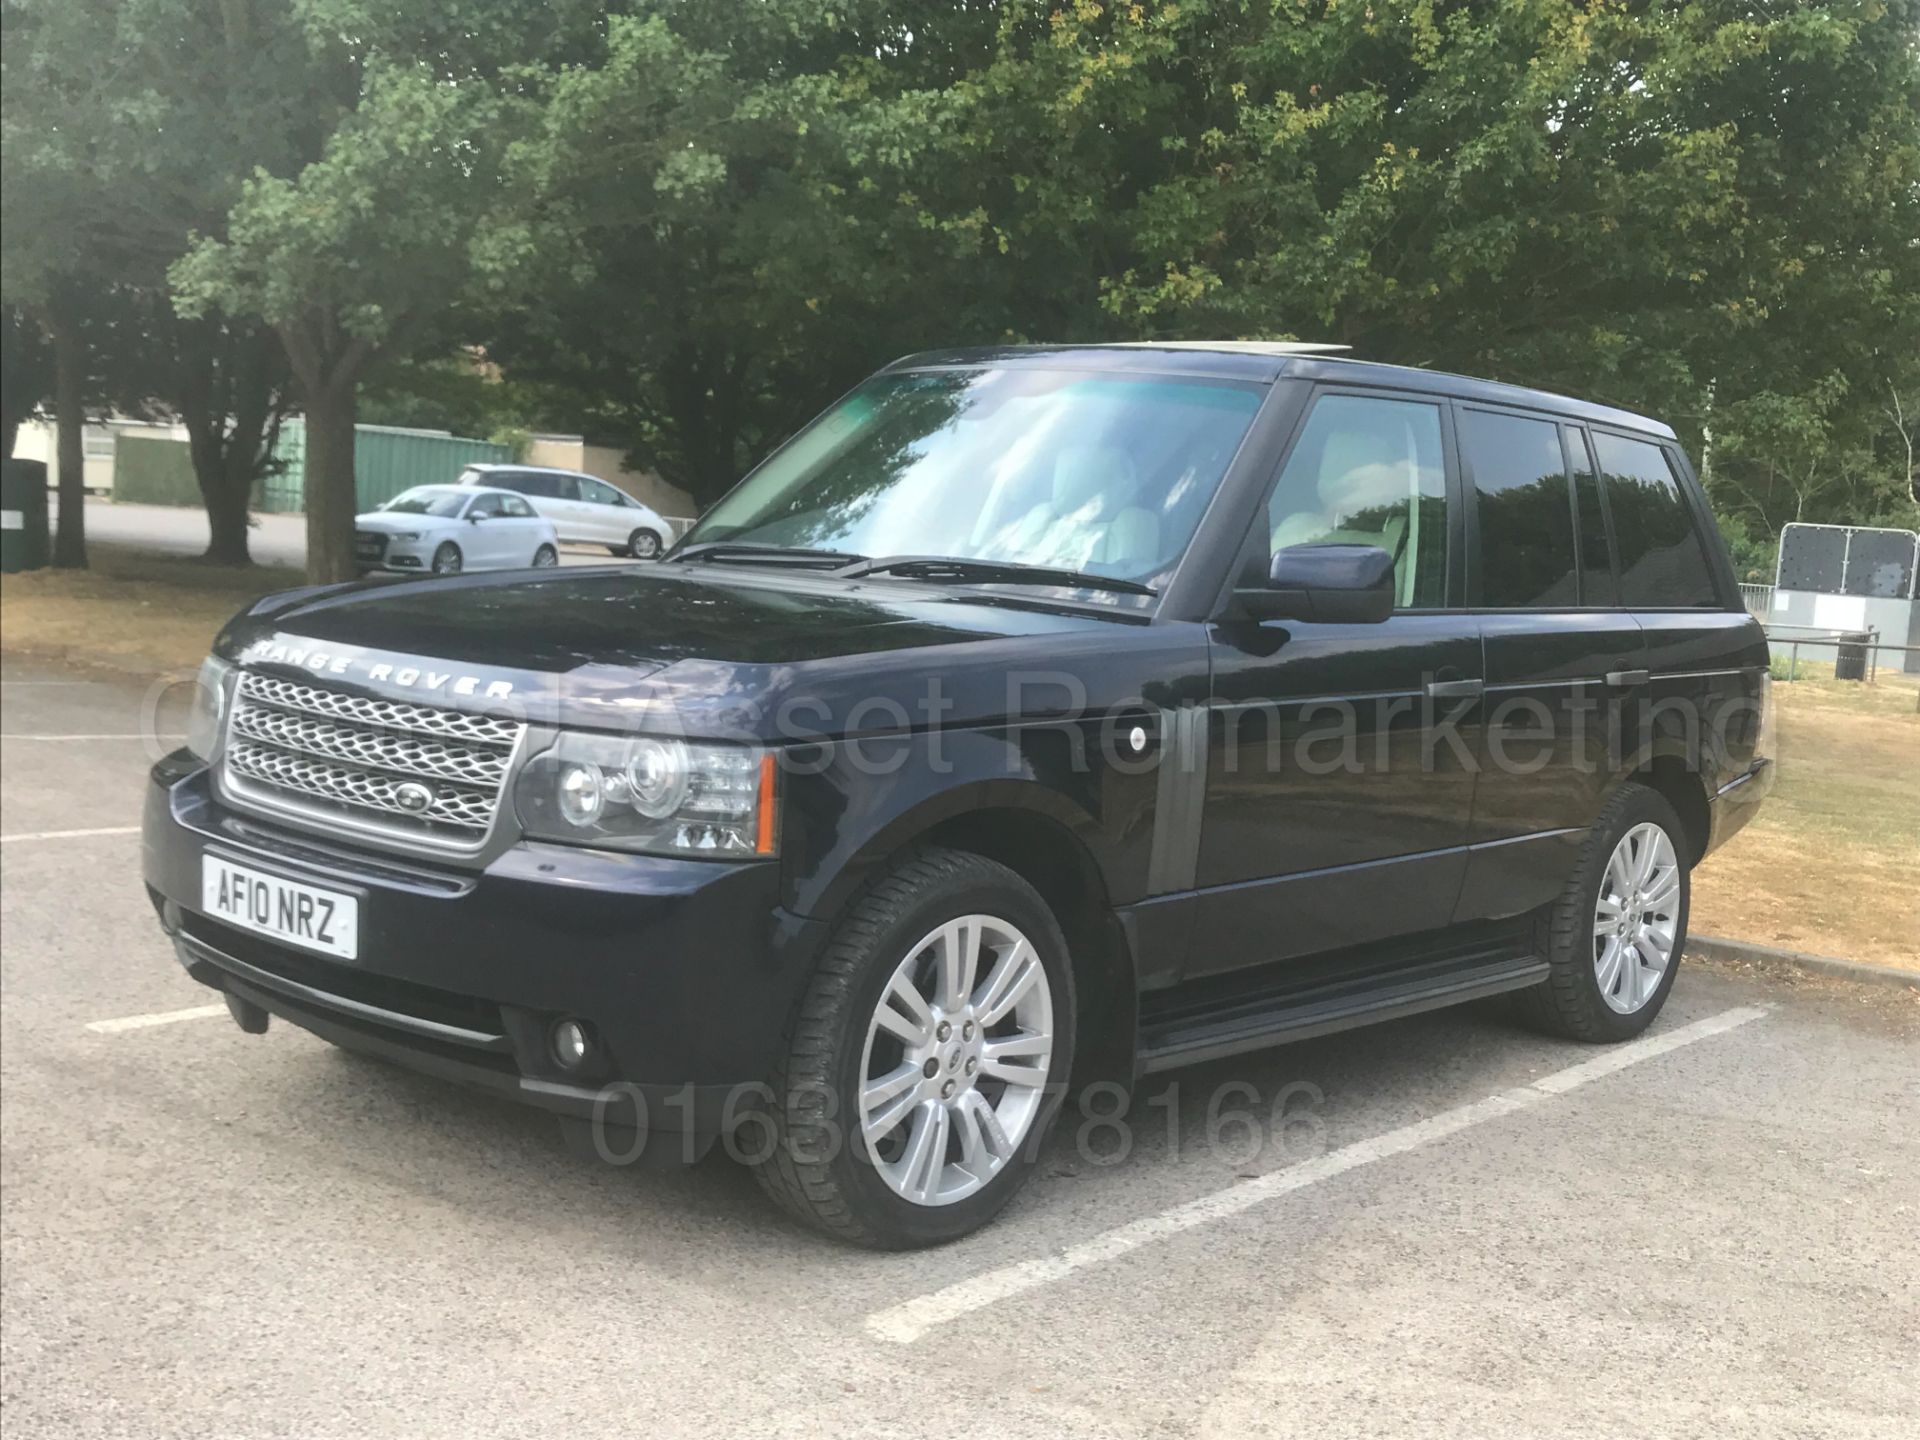 (On Sale) RANGE ROVER VOGUE **SE EDITION** (2010 - FACELIFT EDITION) 'TDV8 - 268 BHP - AUTO' **WOW** - Image 5 of 62